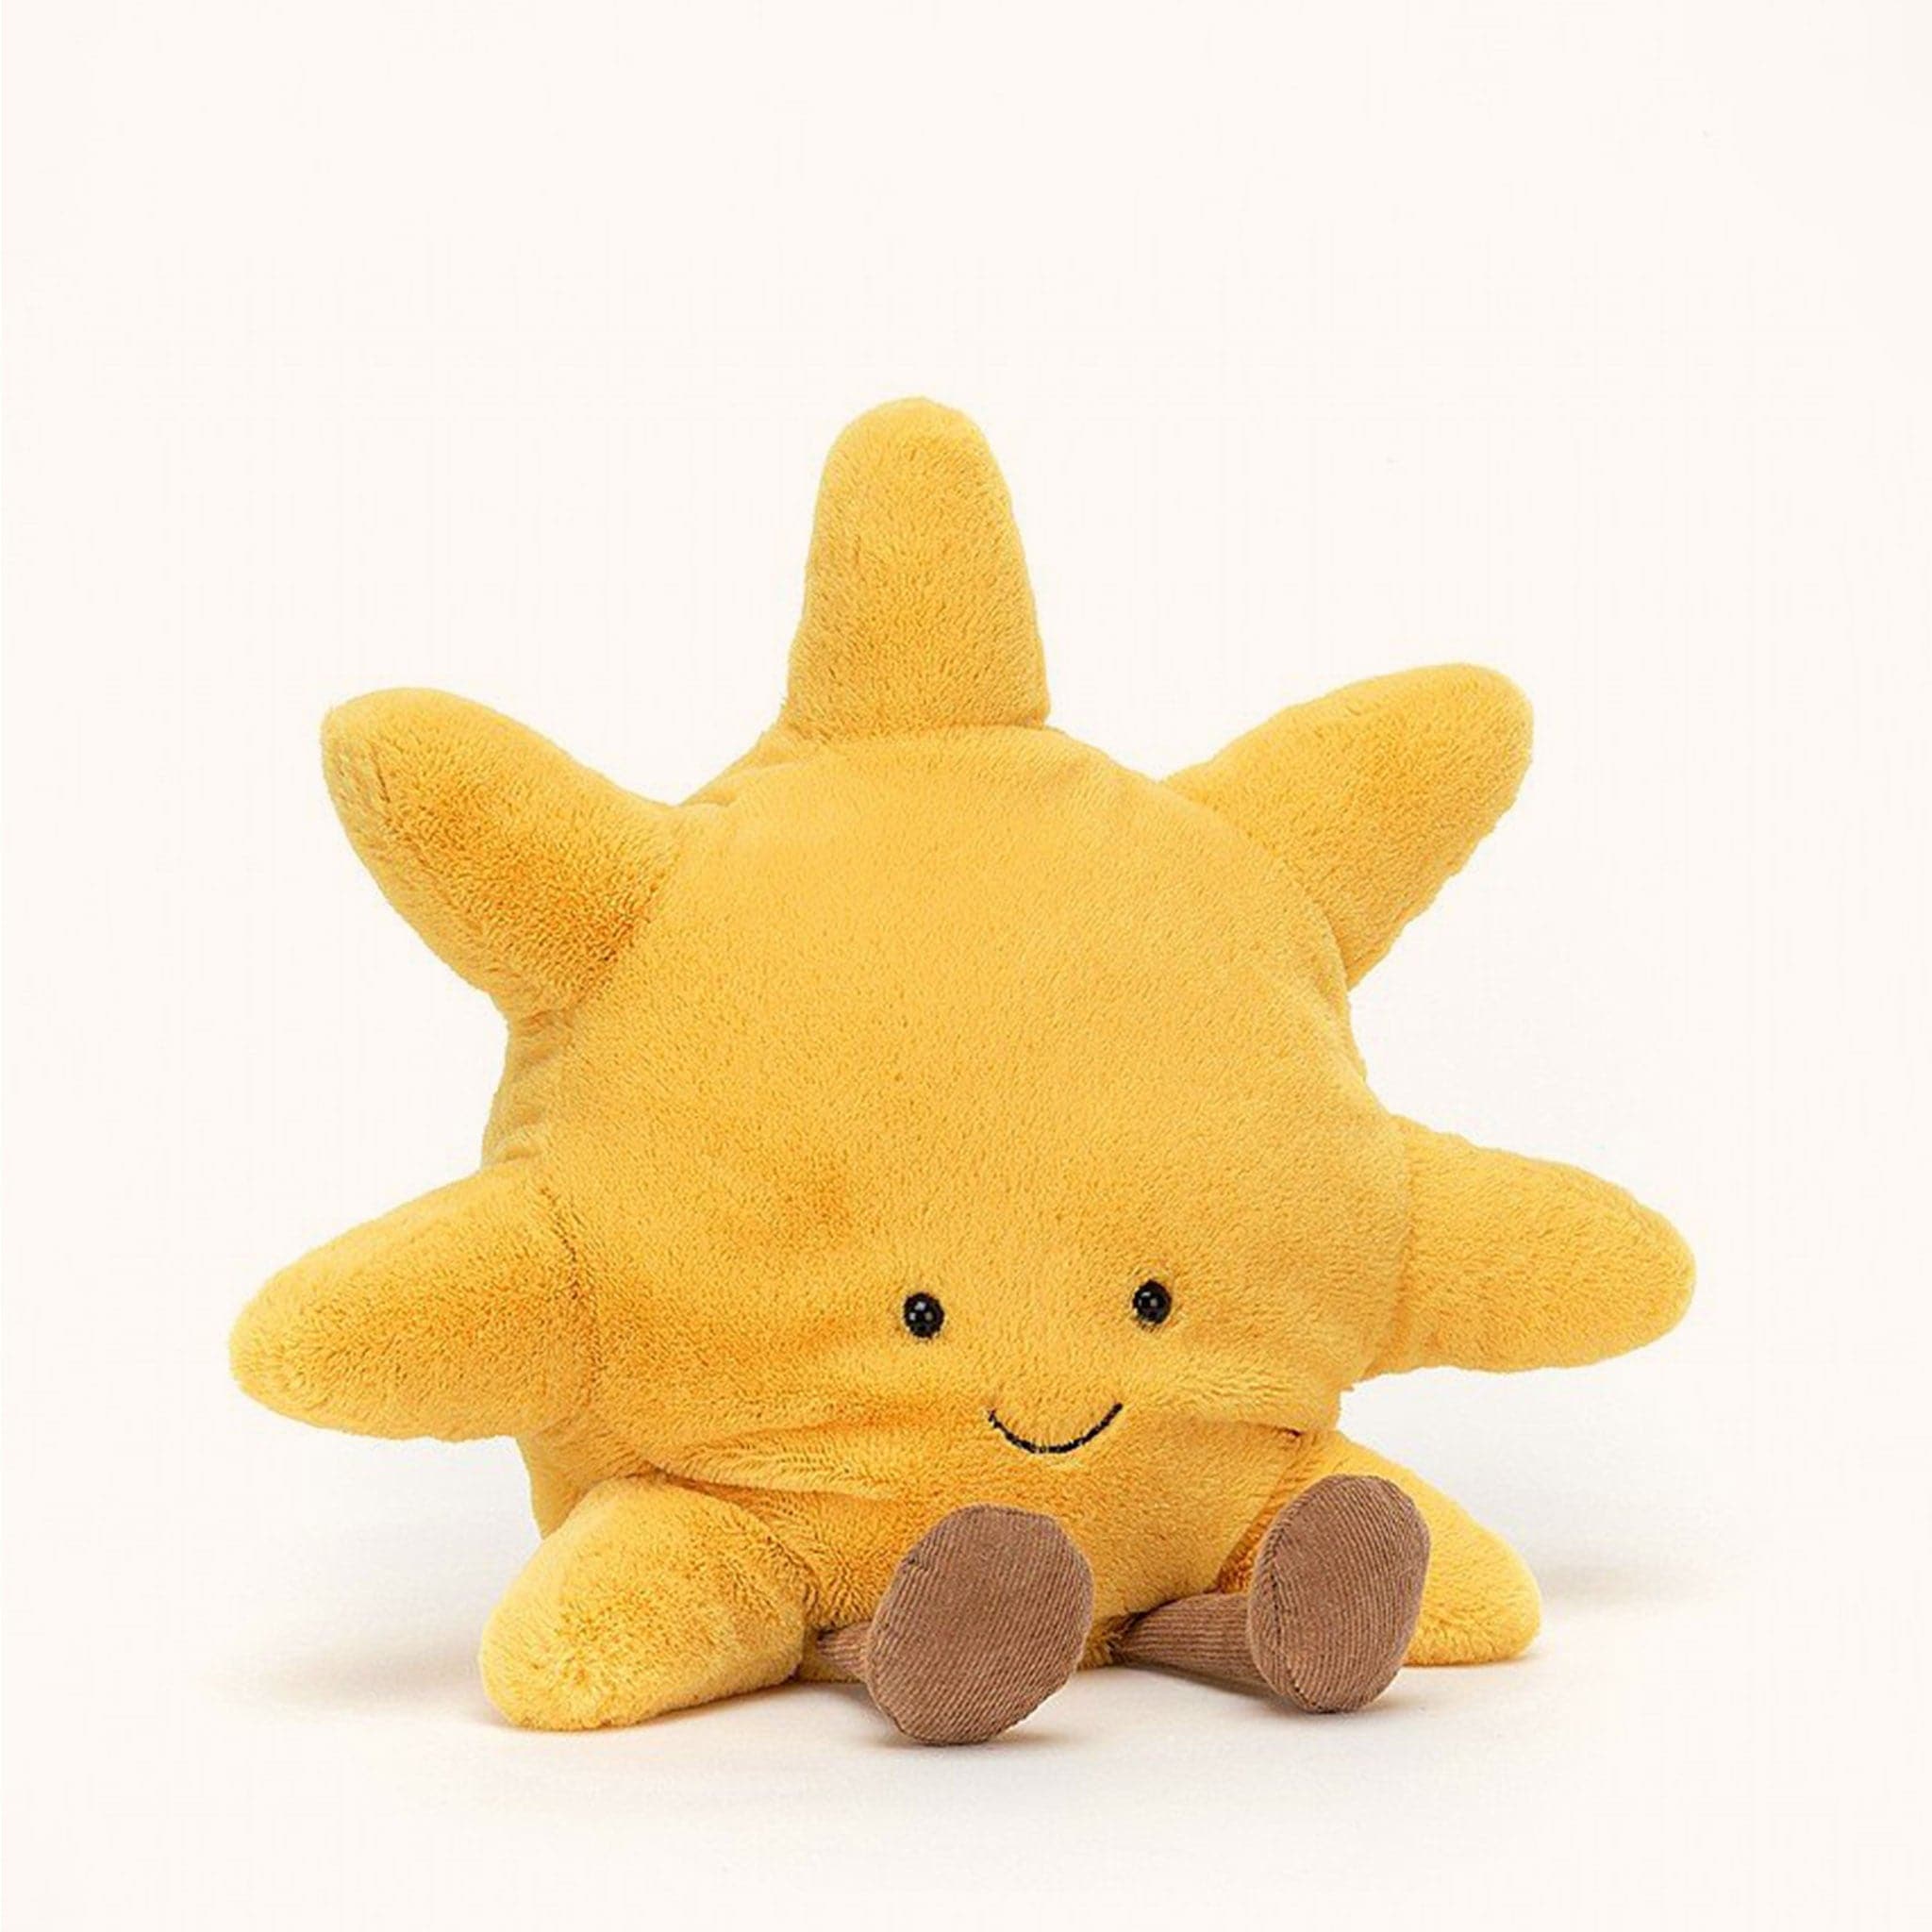 Soft stuffed animal in the shape of a yellow sun, with a smiley face and floppy brown legs.